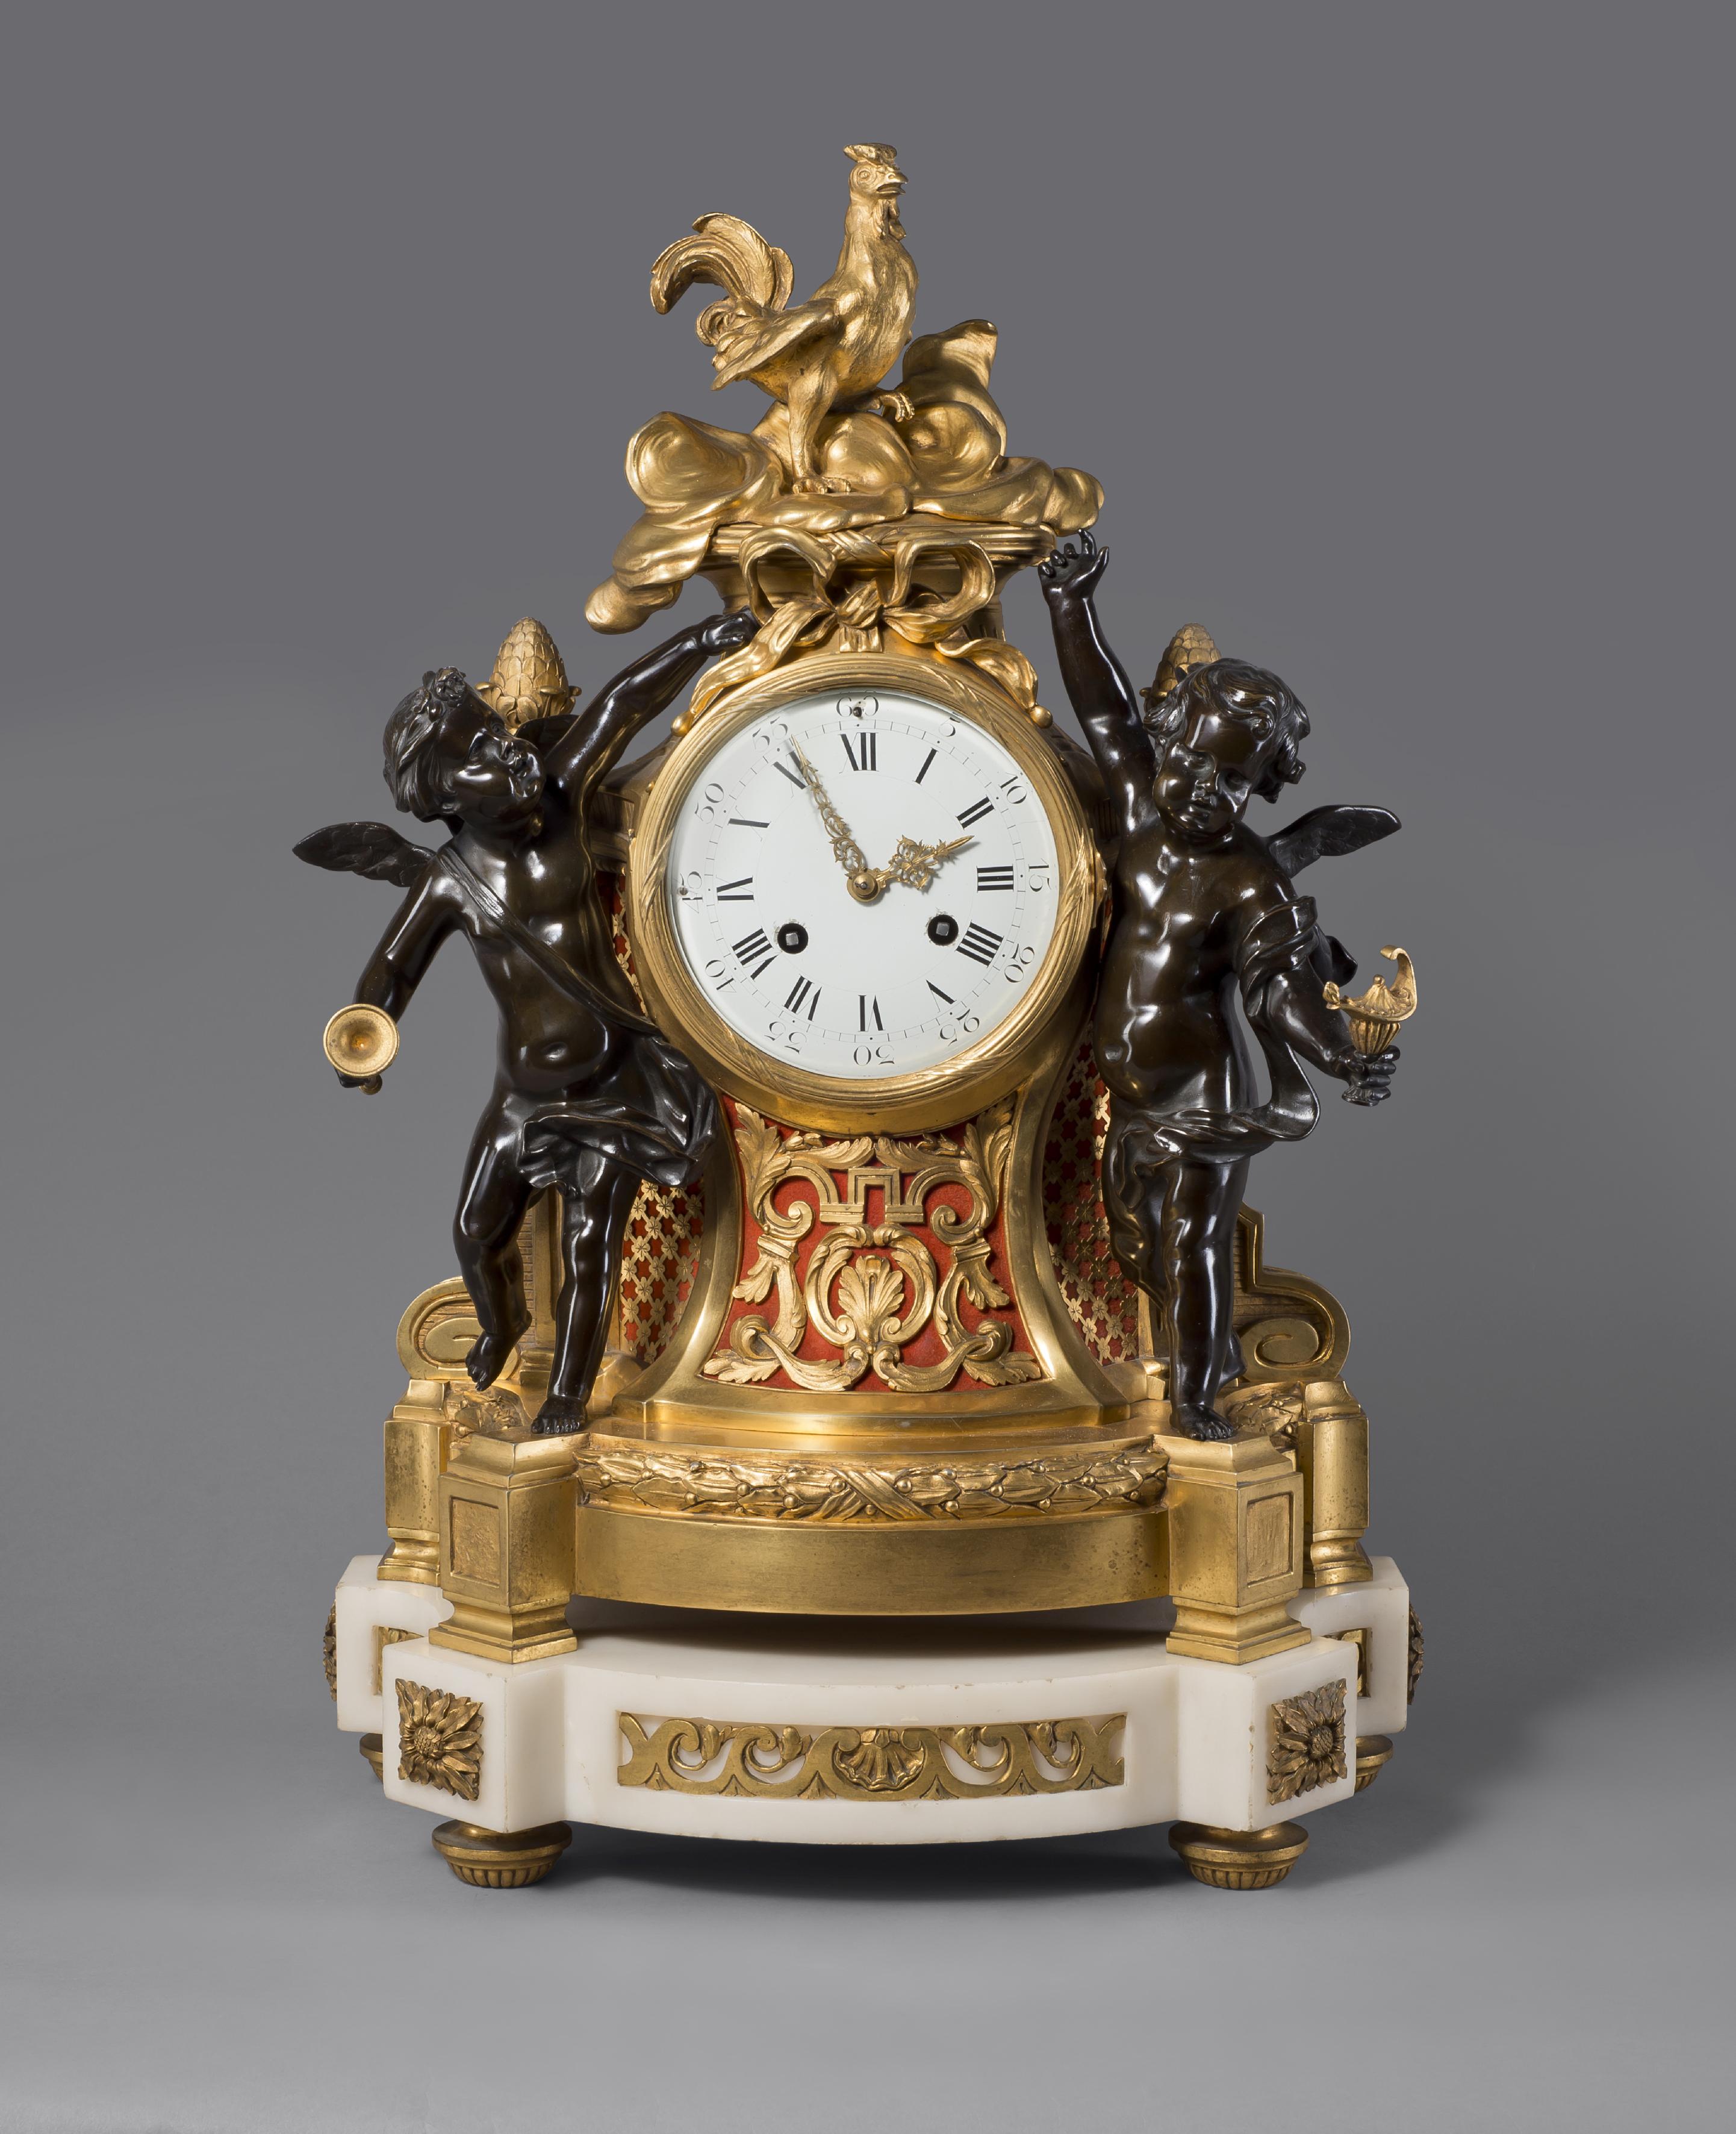 A fine Louis XVI style gilt and patinated bronze figural clock.

French, circa 1870.

This fine clock has a waisted body decorated with scrolls and trellis centred by a white enamel dial with Roman numerals surmounted by a cockerel and flanked